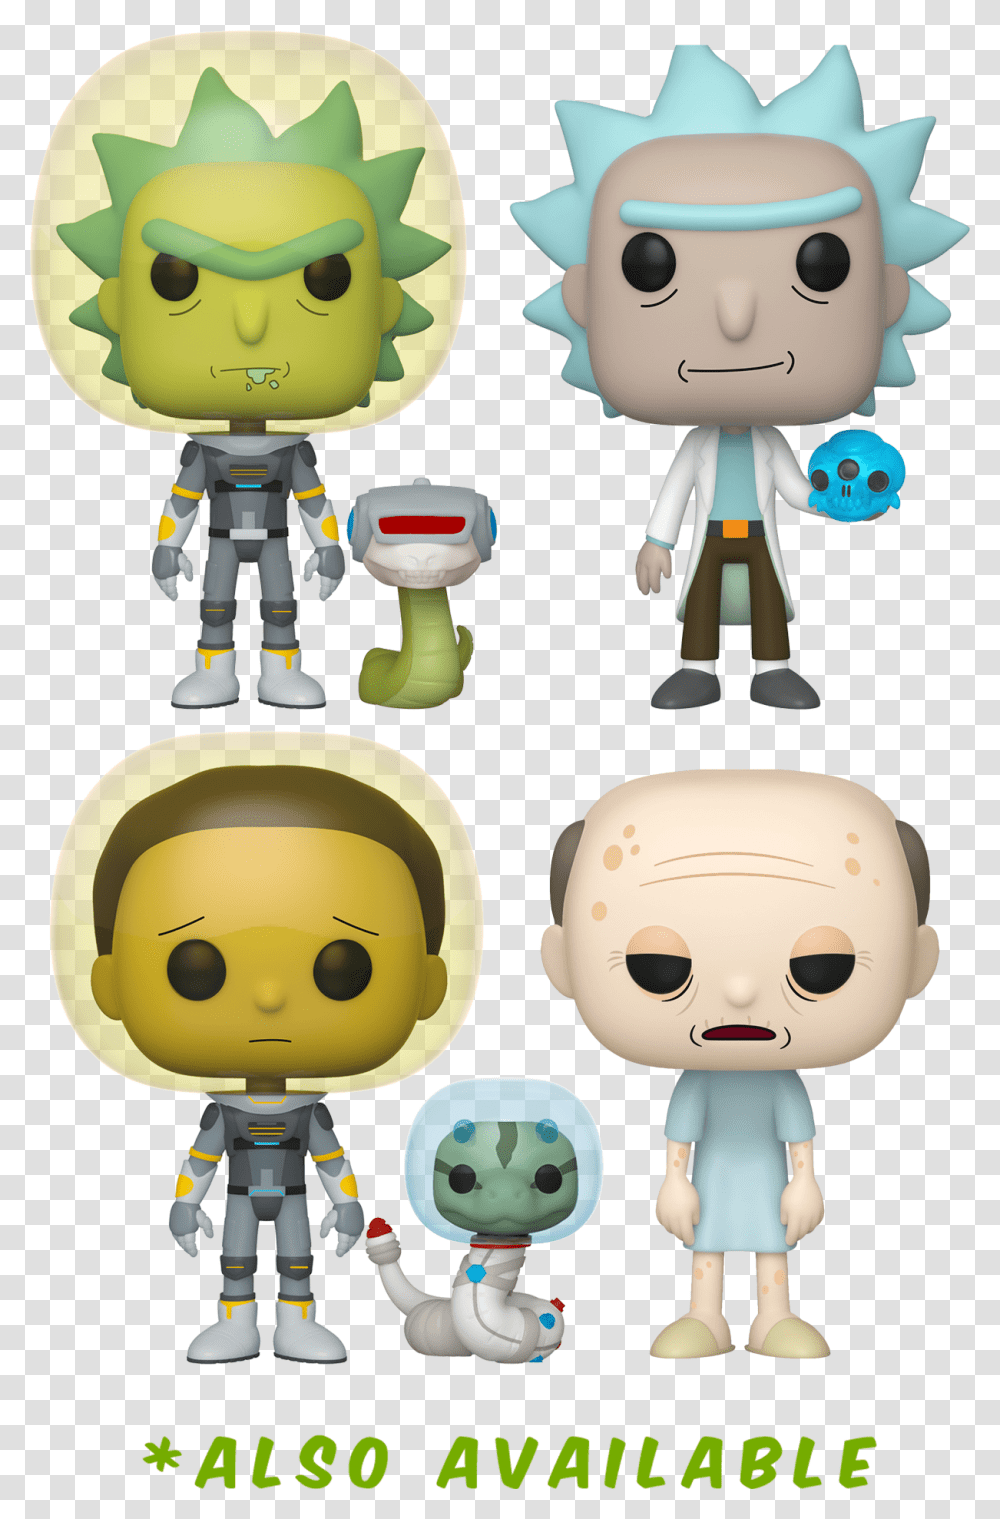 Funko Pop Rick And Morty Rick And Morty Snake Jazz, Toy, Robot, Doll, Figurine Transparent Png